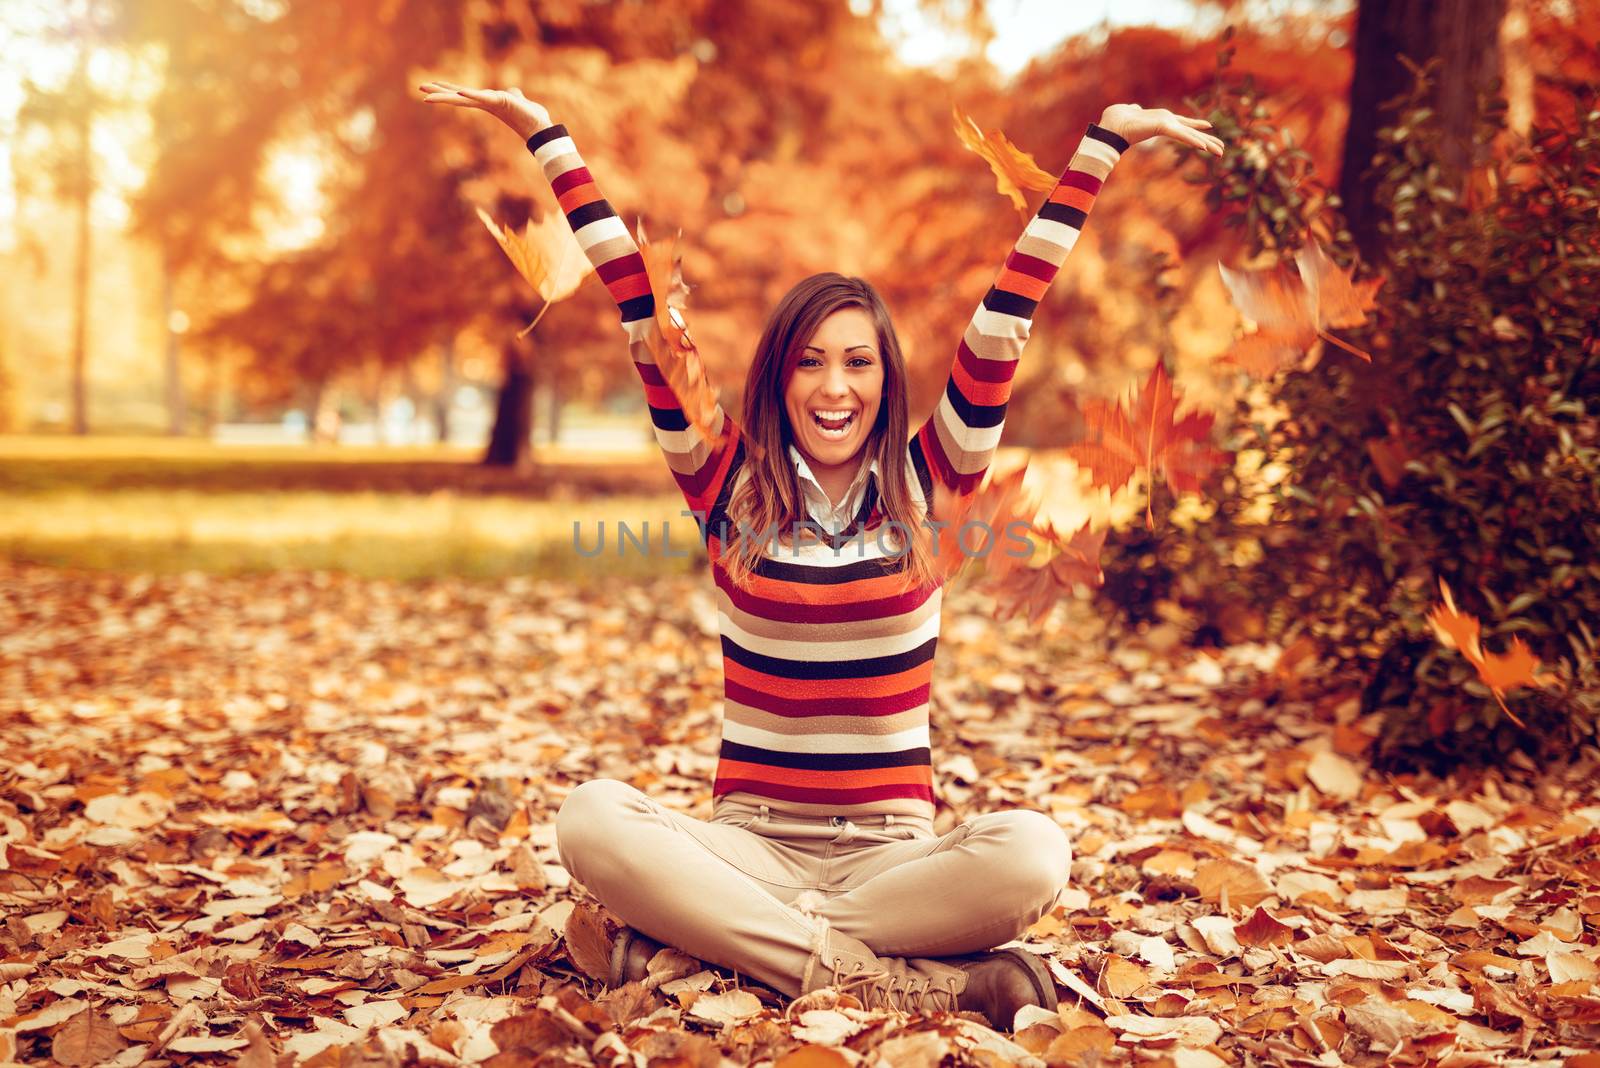 Cute young woman enjoying in sunny forest in autumn colors. She is sitting on the ground covered with leaves and having fun.